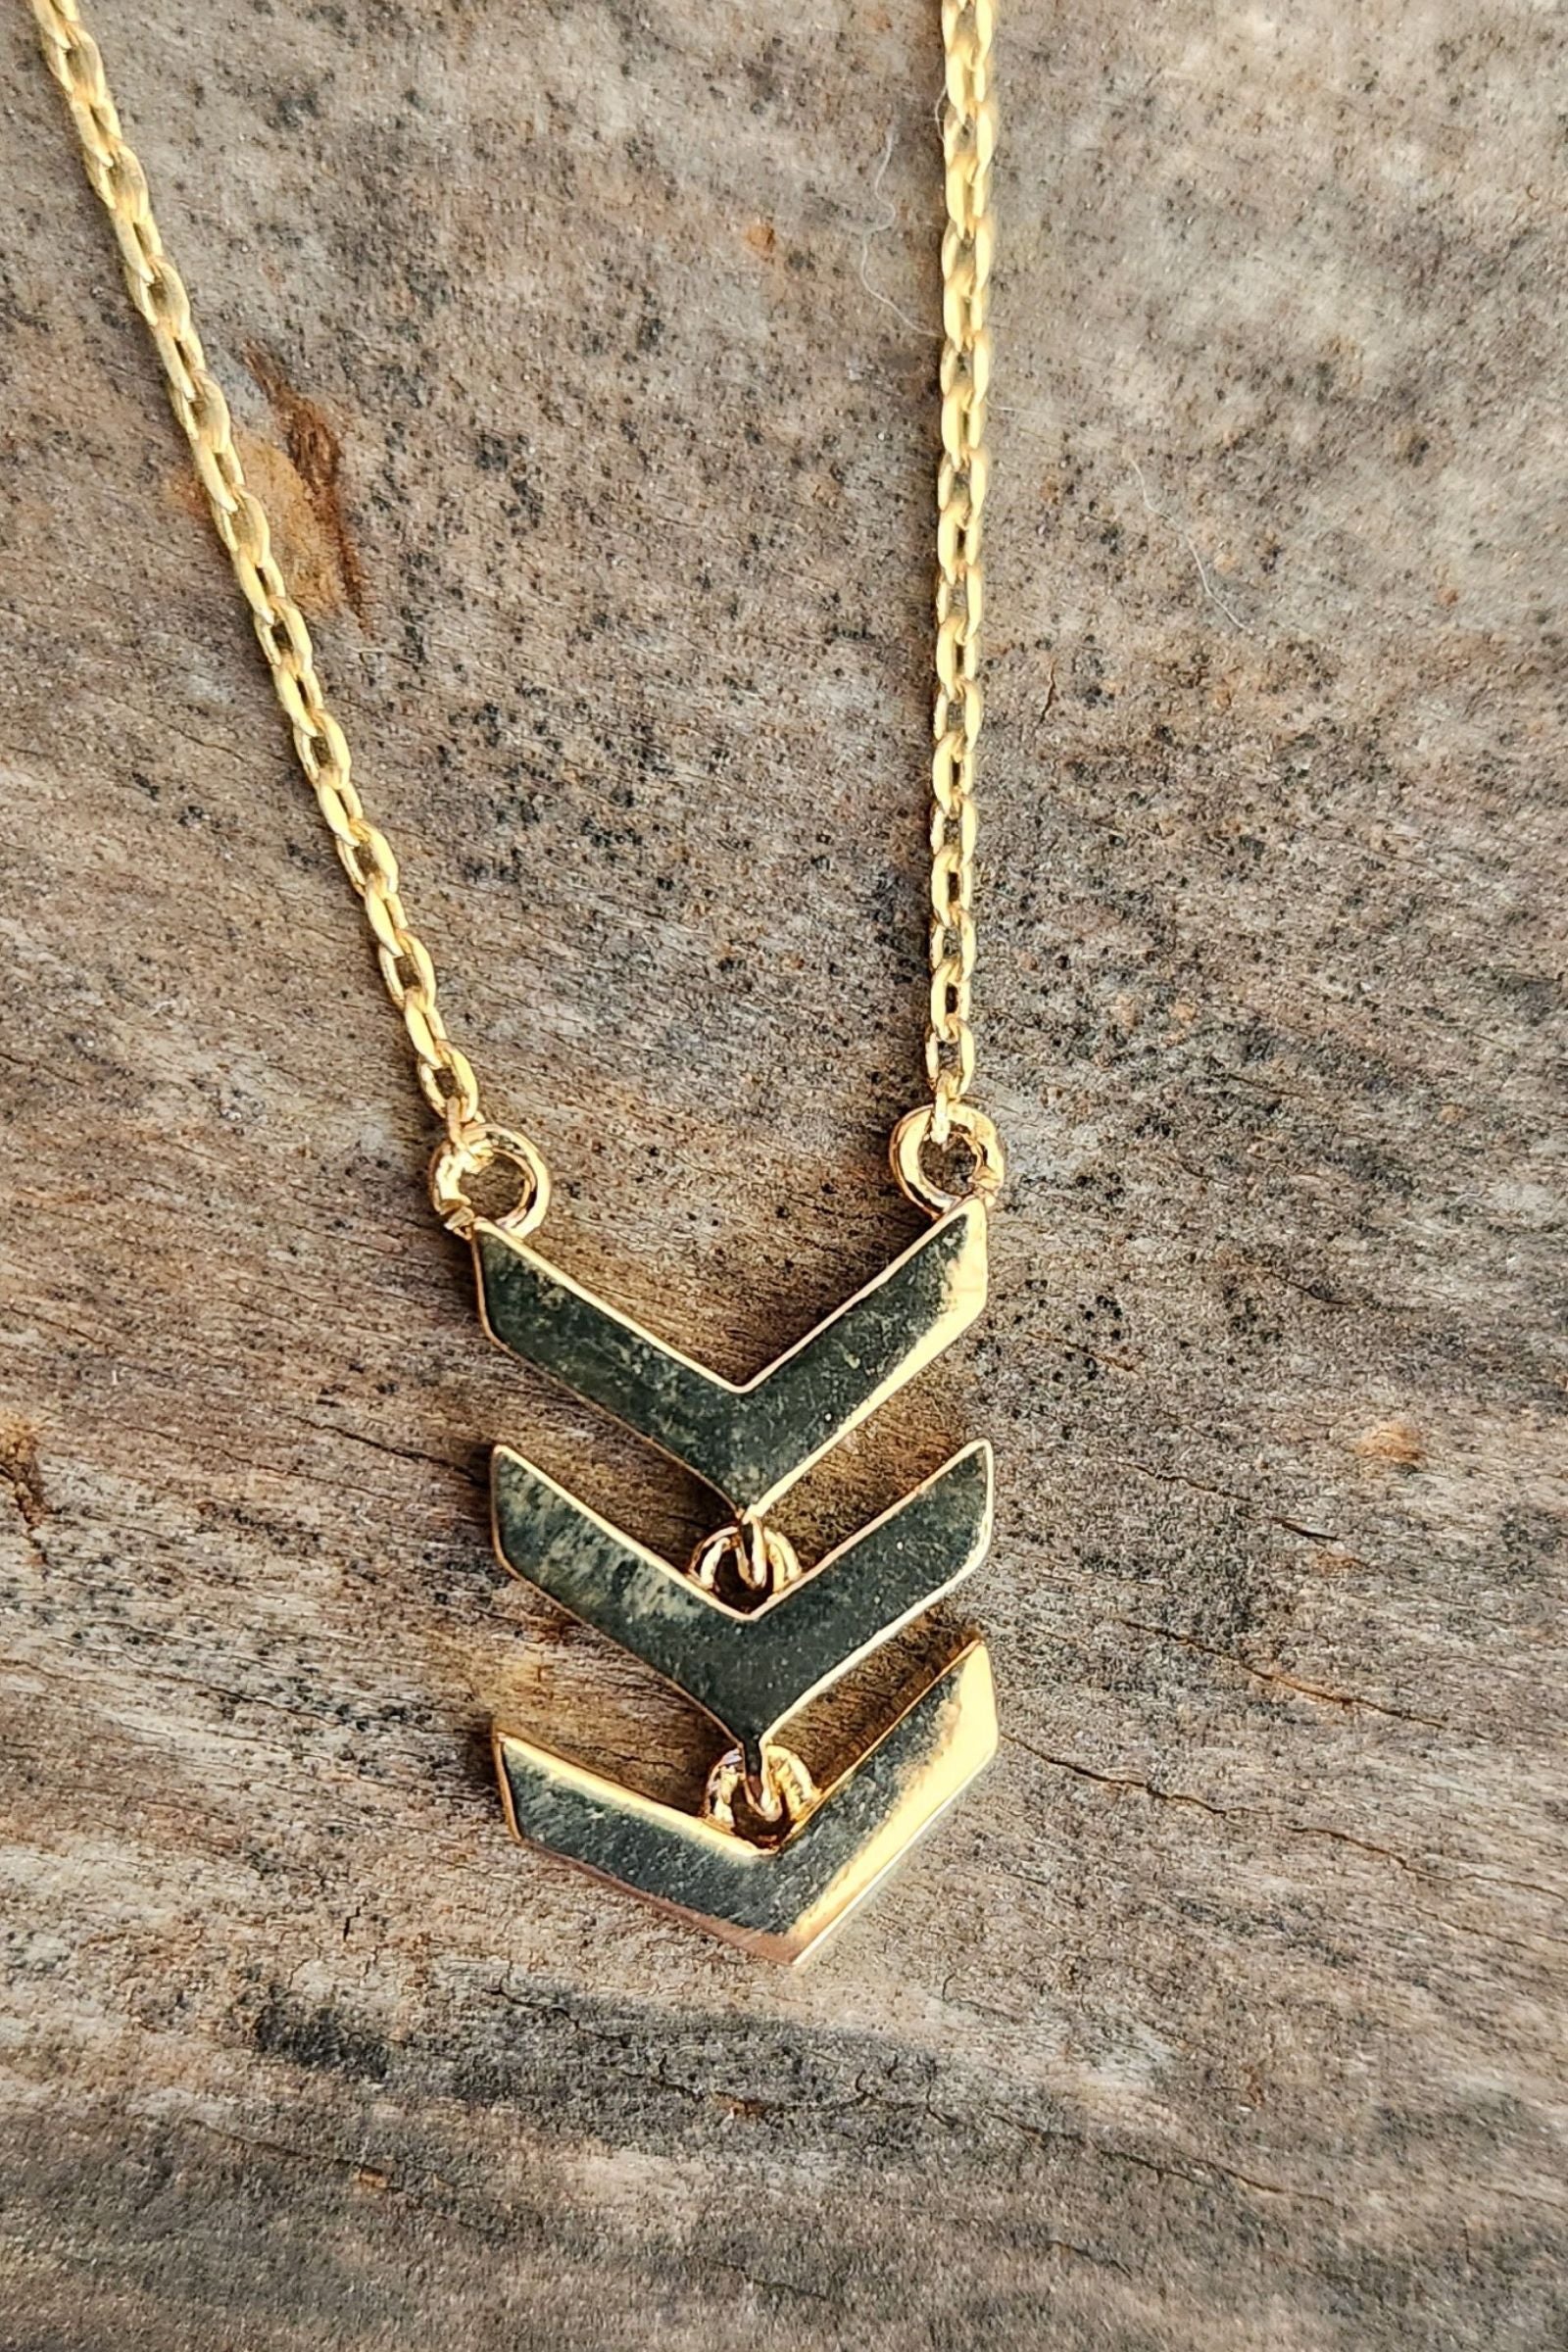 Golden Loyalty Tiered Arrows Necklace